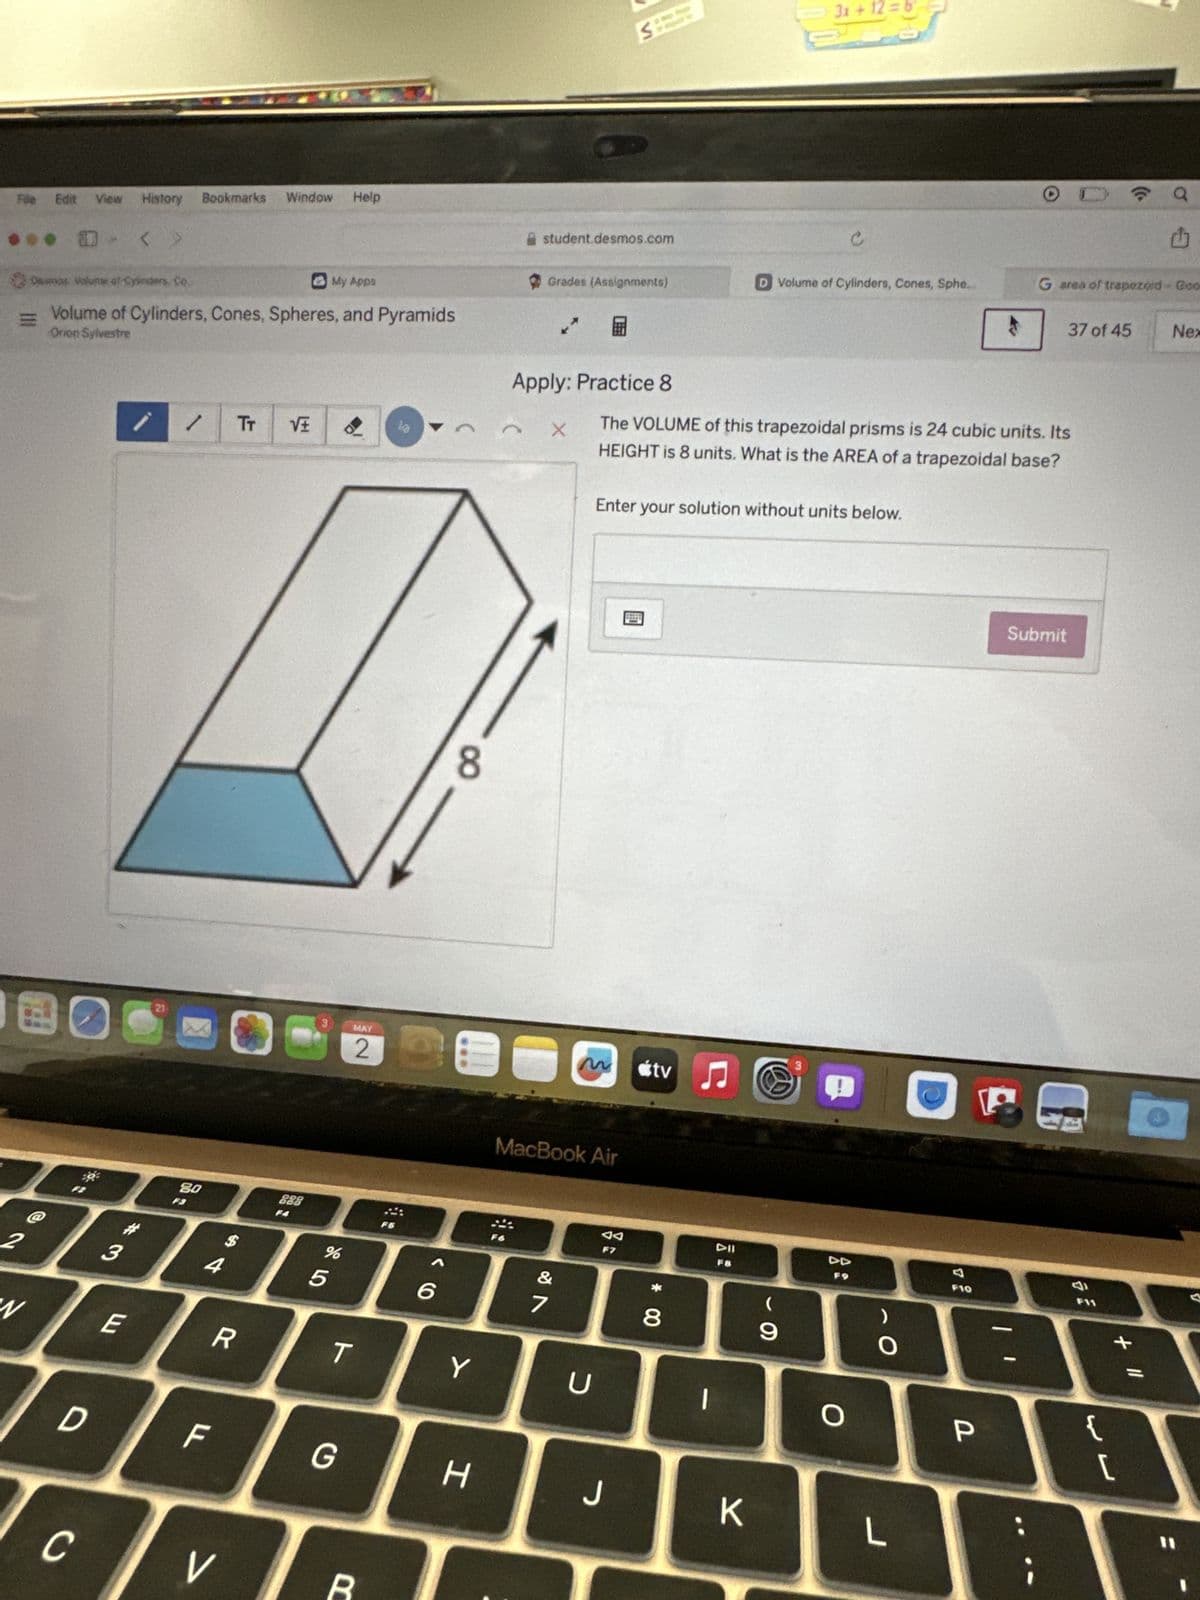 Føle Edit View History Bookmarks Window Help
・ㄑ
< >
student.desmos.com
3x+12=6
a
Damos Volume of Cylinders, Co.
My Apps
Grades (Assignments)
D Volume of Cylinders, Cones, Sphe...
G area of trapezoid - Goo
=U
Volume of Cylinders, Cones, Spheres, and Pyramids
37 of 45
Nex
Orion Sylvestre
Apply: Practice 8
/
TT
X
The VOLUME of this trapezoidal prisms is 24 cubic units. Its
HEIGHT is 8 units. What is the AREA of a trapezoidal base?
21
@
80
$
4
DBE
2
3
W
ELI
888
MAY
2
8
%
85
Enter your solution without units below.
96
MacBook Air
27
Submit
tv♫♬
J
P
F7
Y
U
R
T
* 00
8
F8
་
9
DD
F9
O
>
D
F
G
H
J
K
L
V
C
R
F10
-
P
F11
+ "
{
لالها
[